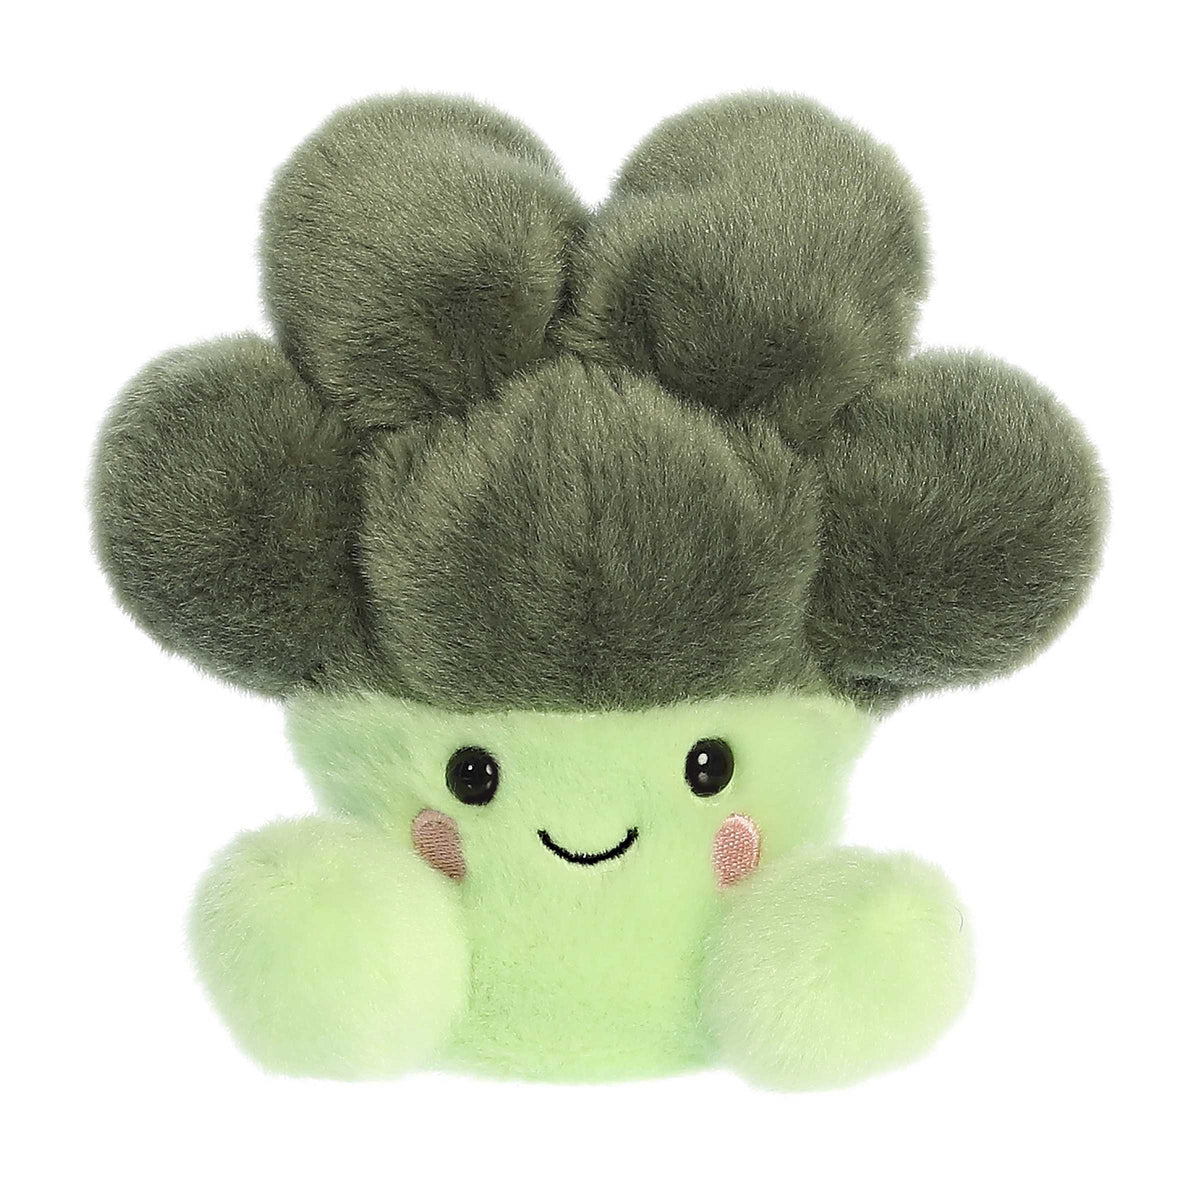 Cuddly mini broccoli shaped plush with light green and olive green fur body, embroidered smiling face and black colored eyes.